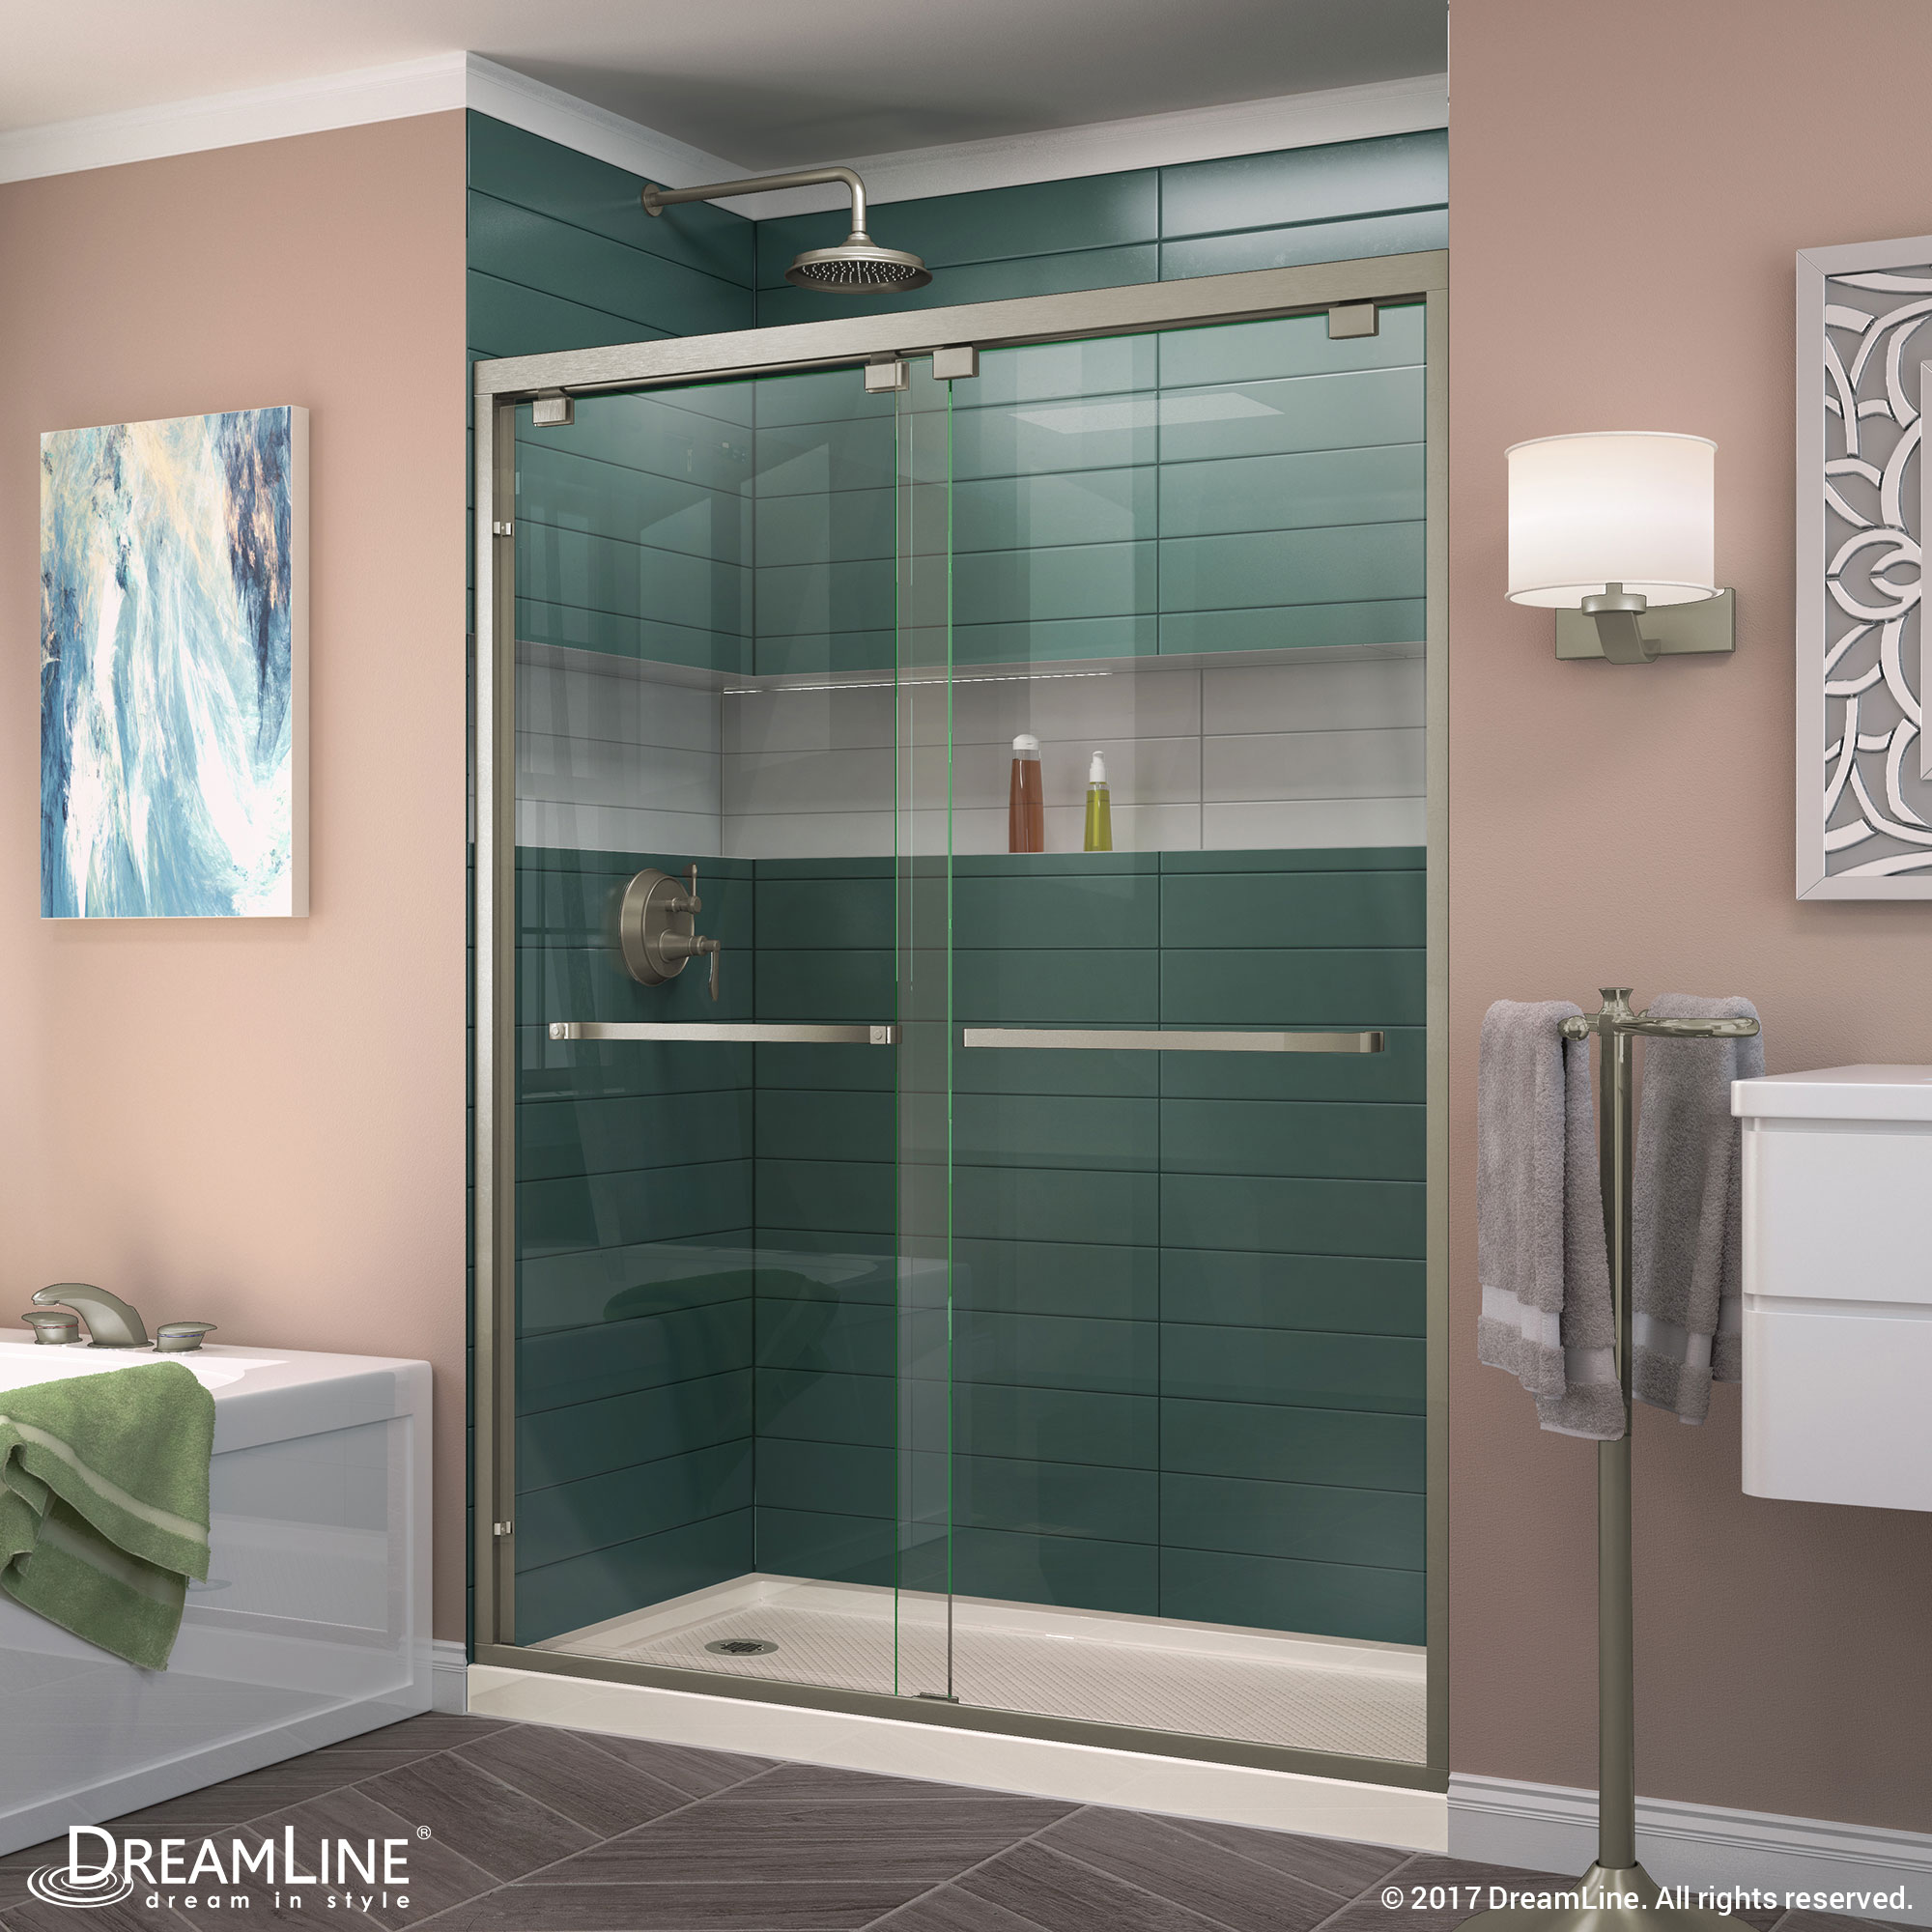 DreamLine Encore 30 in. D x 60 in. W x 78 3/4 in. H Bypass Shower Door in Chrome and Left Drain Biscuit Base Kit